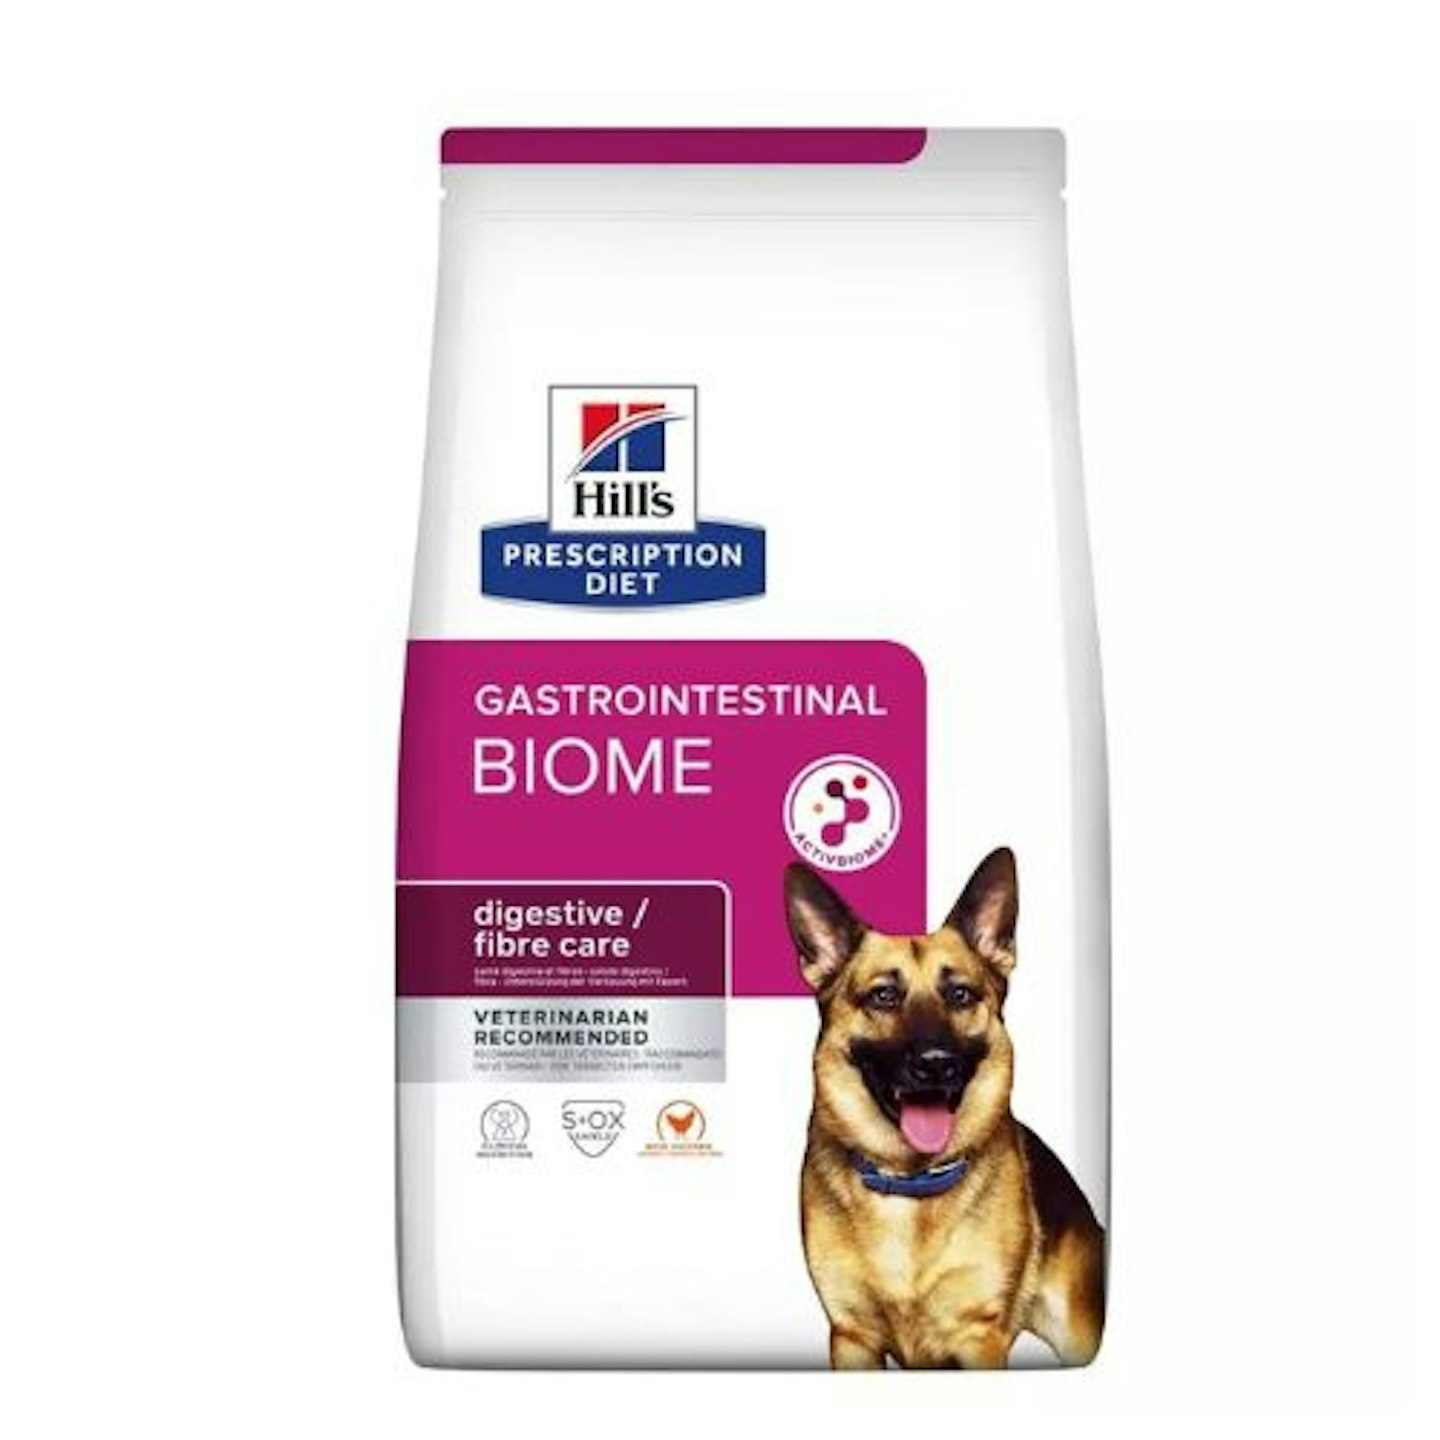 Hill's Prescription Diet Gastrointestinal Biome Dry Dog Food with Chicken